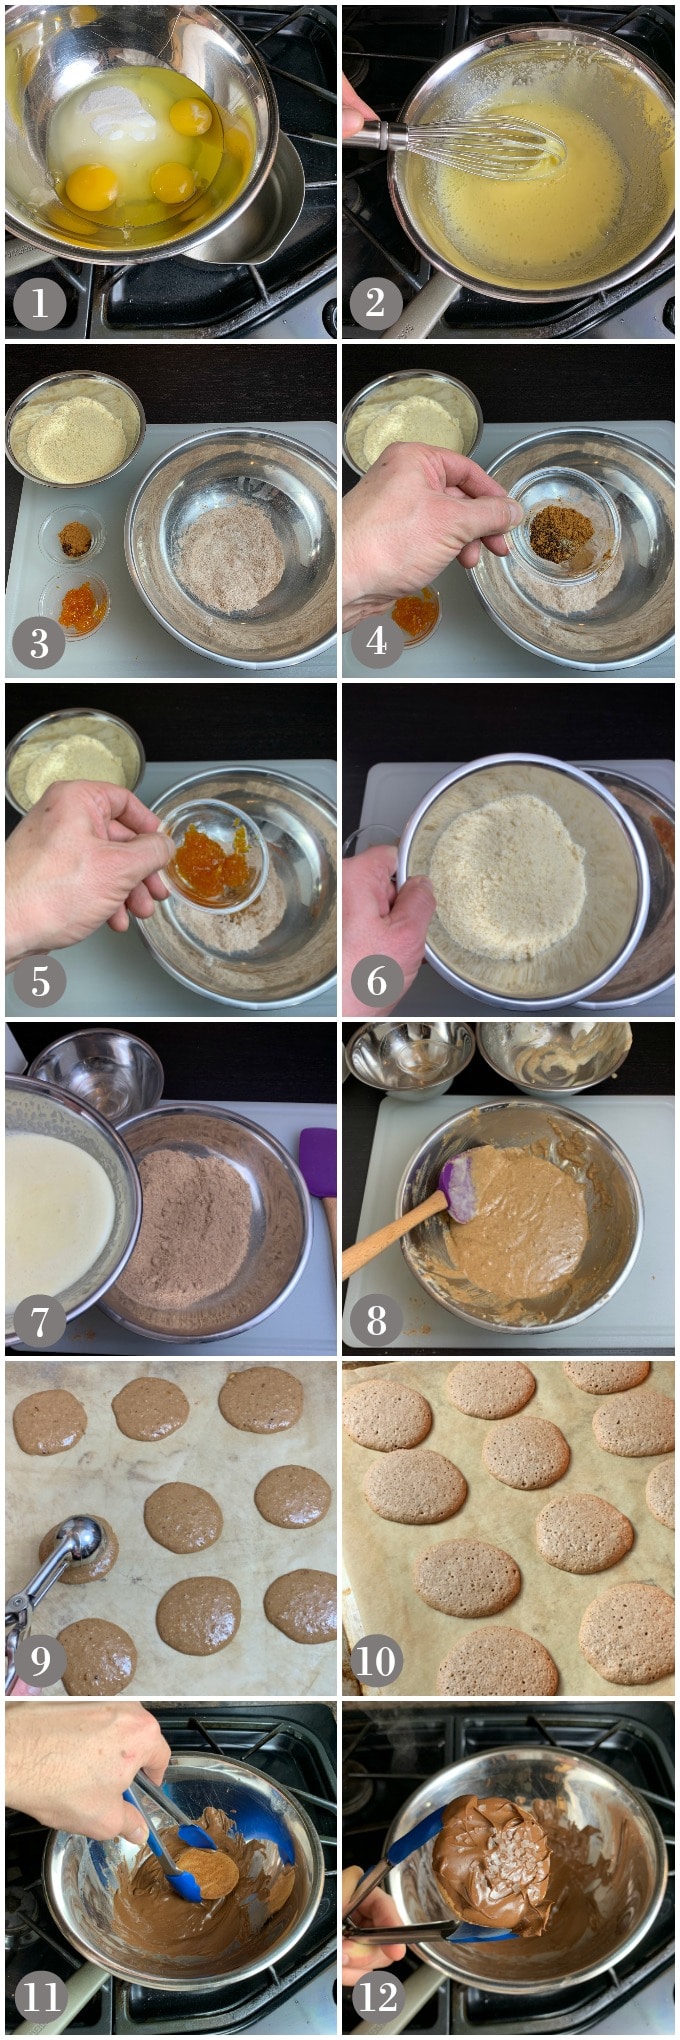 A collage of photos showing steps to make lebkuchen cookies.